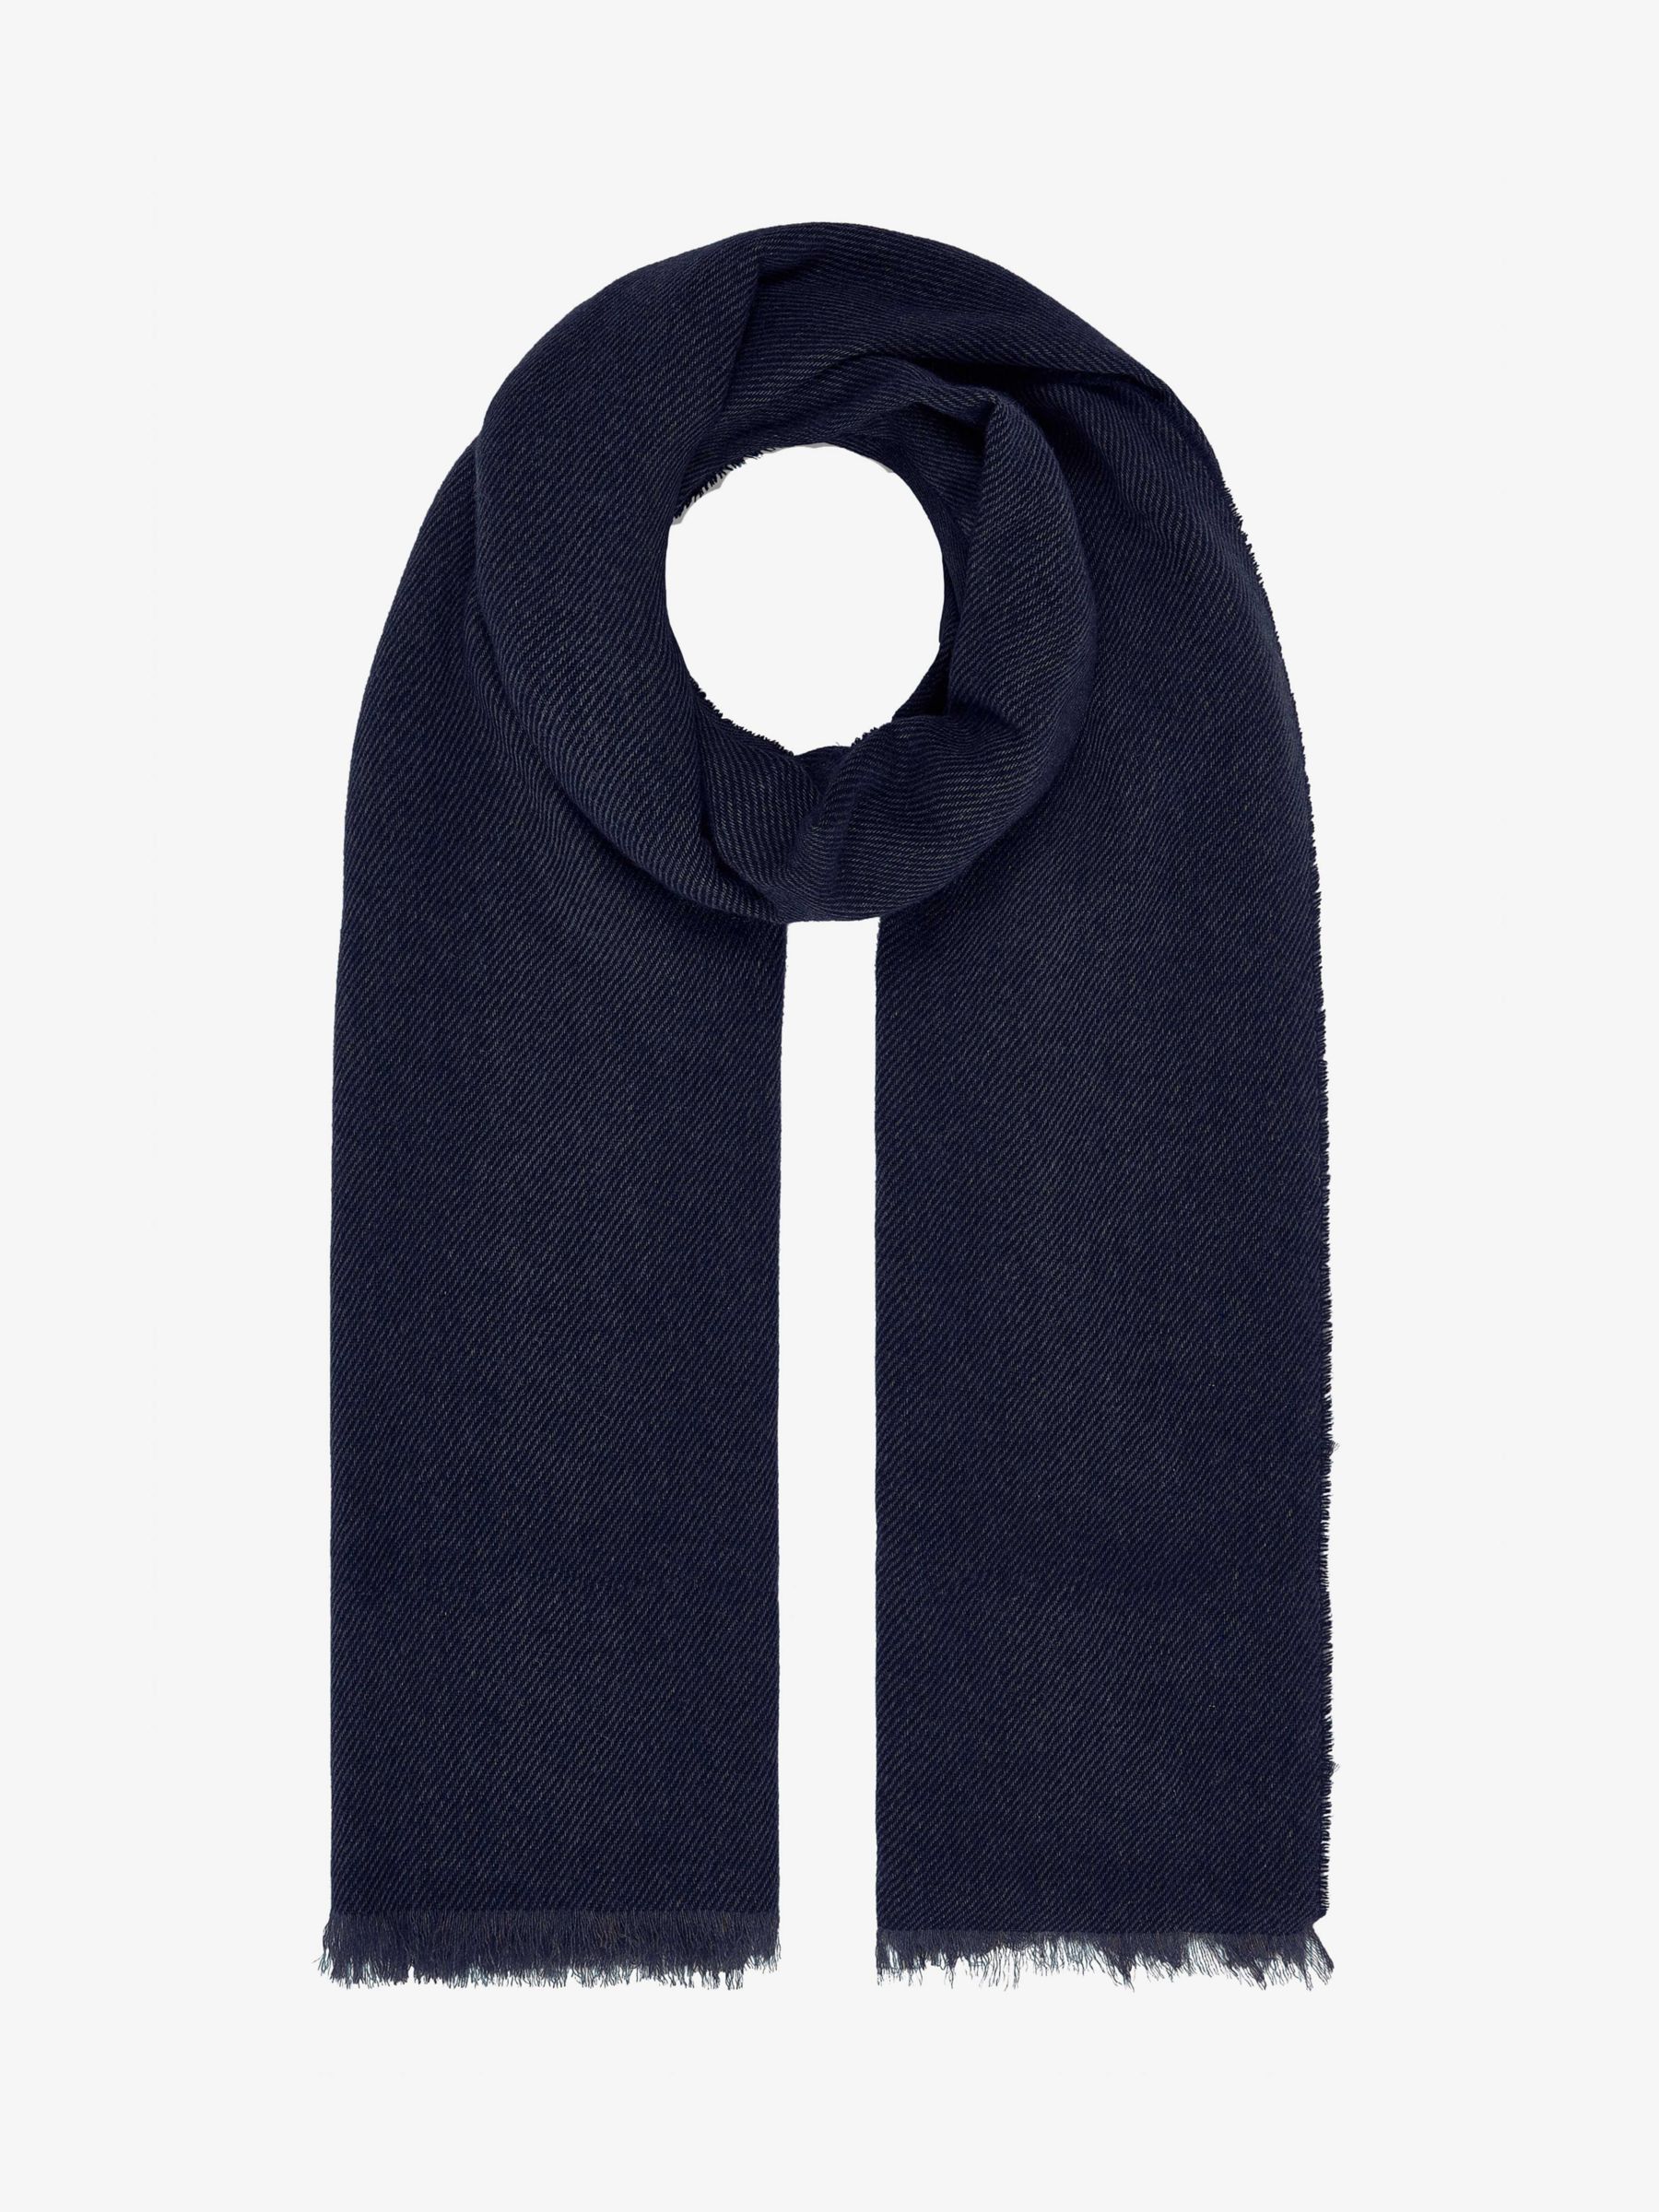 Brora Cashmere Stole Scarf, Navy at John Lewis & Partners